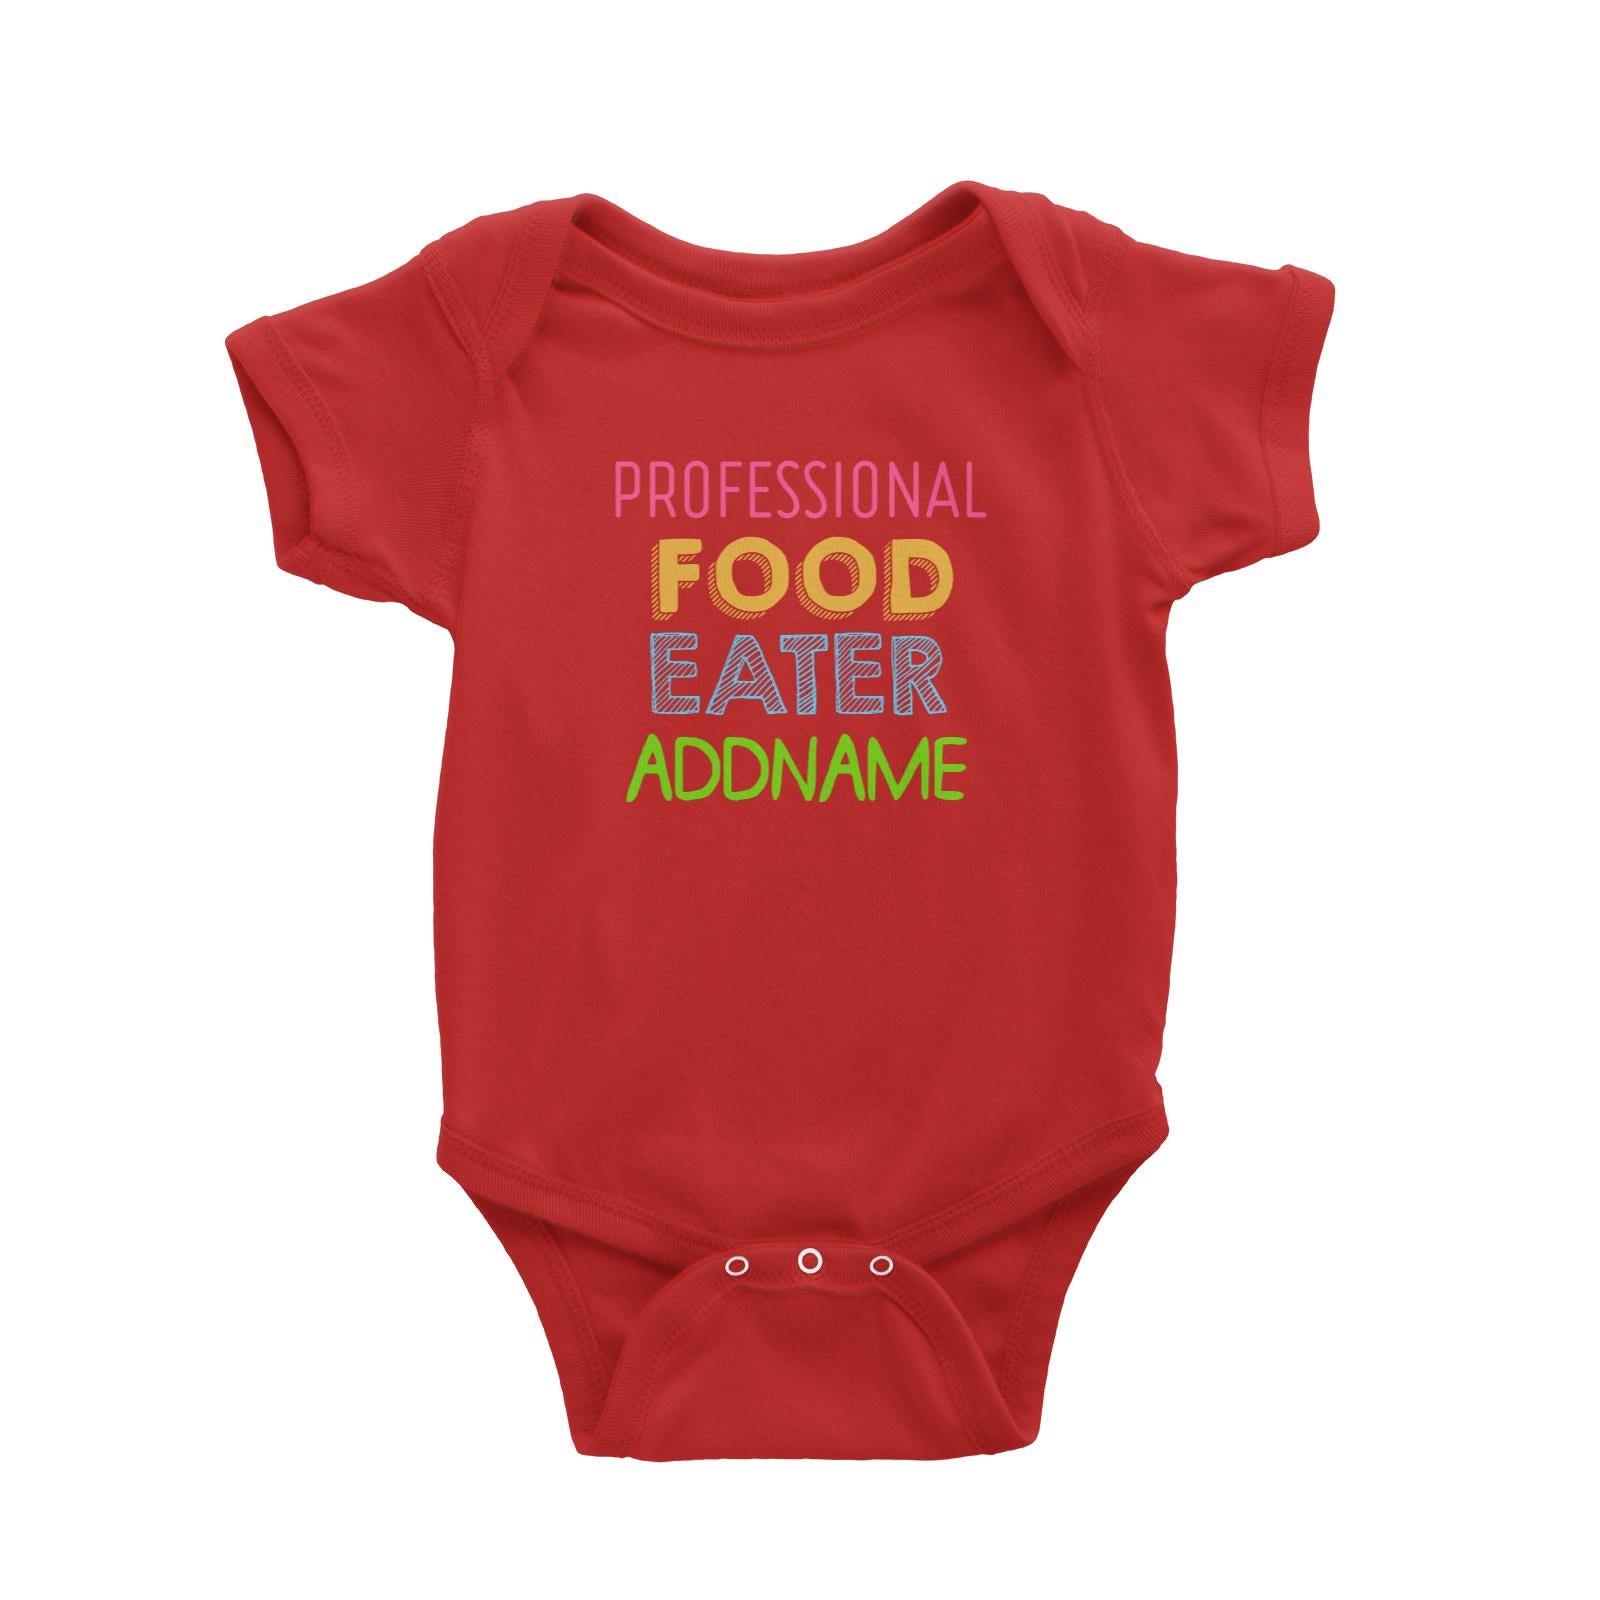 Professional Food Eater Addname Baby Romper